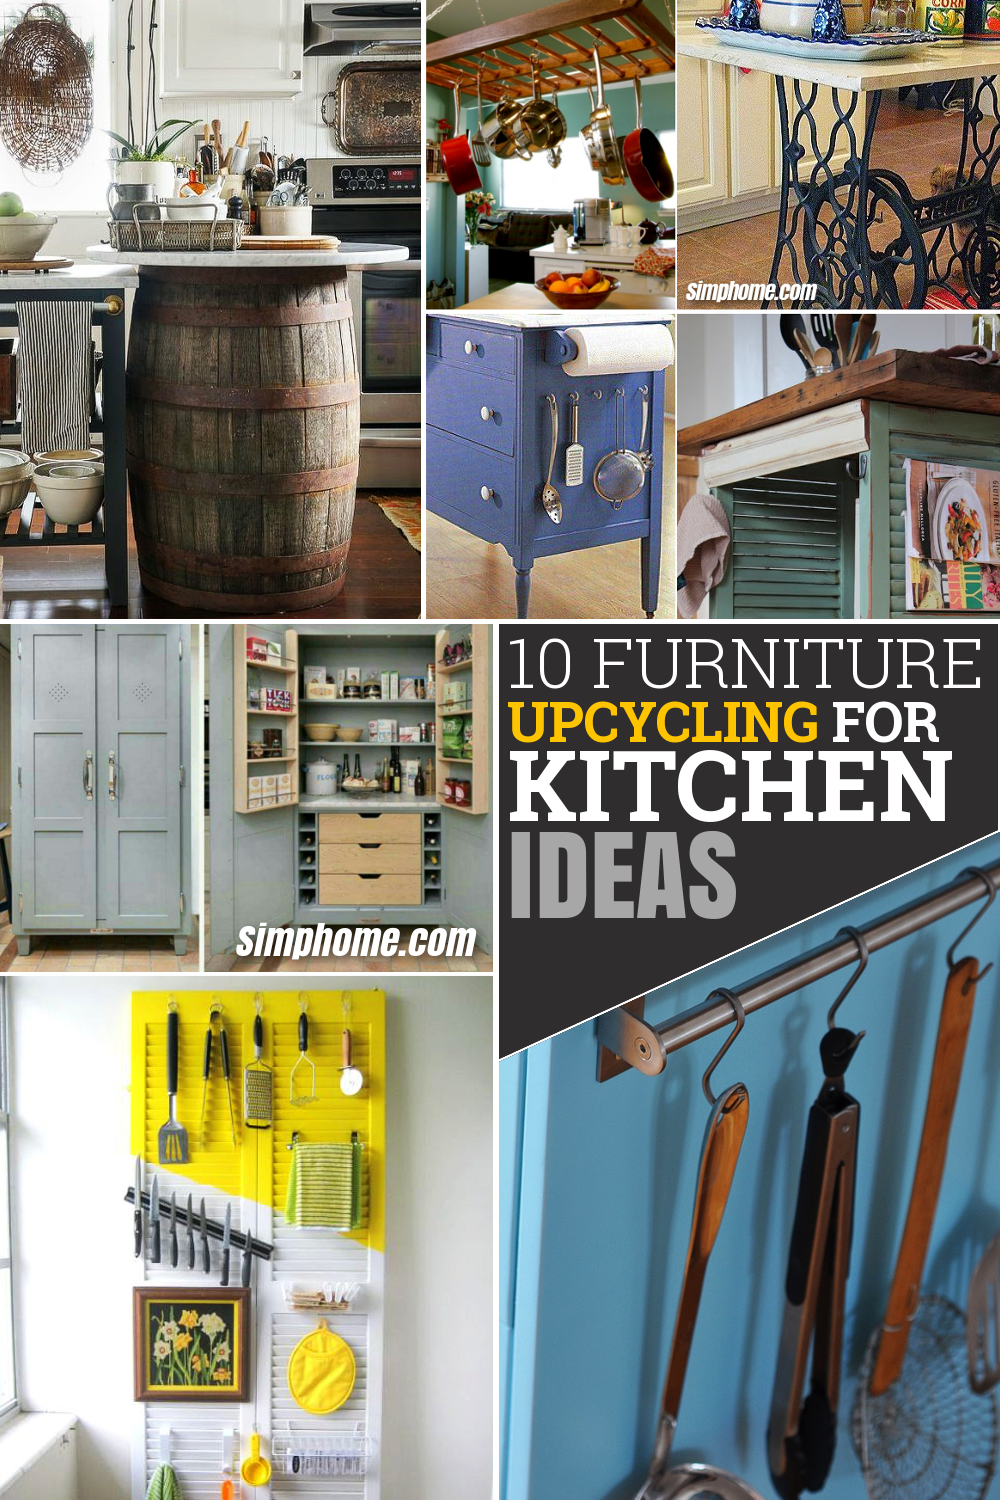 10 Furniture Upcycling for Kitchen ideas via Simphome.com Pinterest image